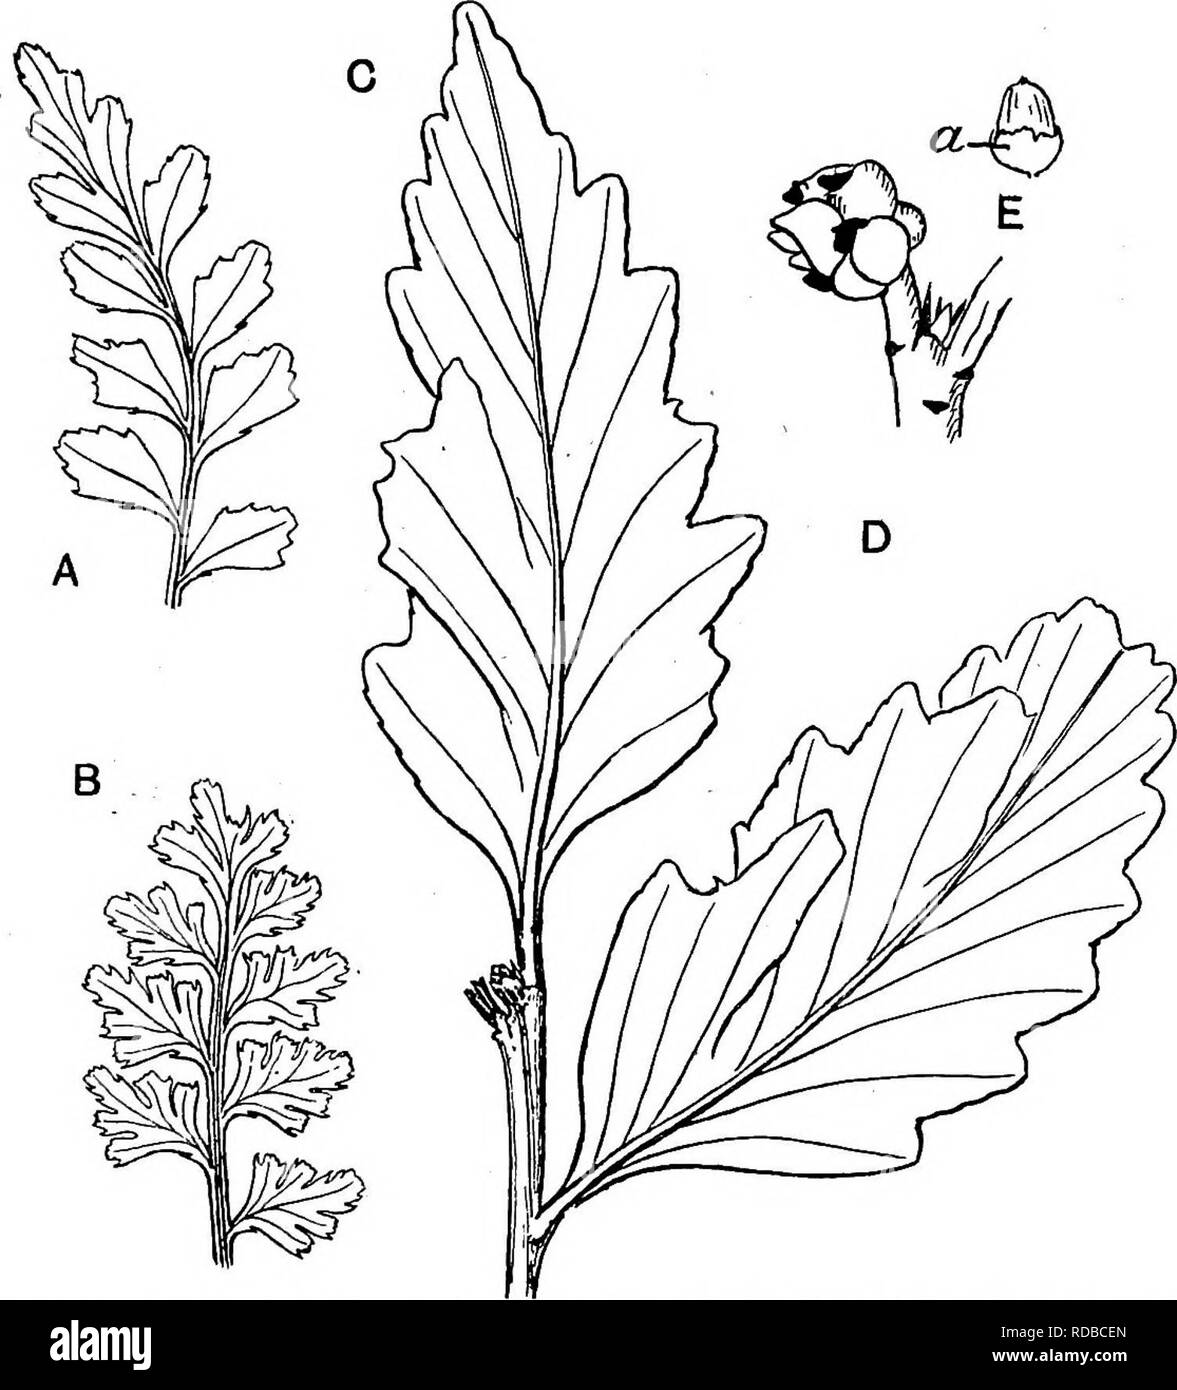 . Fossil plants : for students of botany and geology . Paleobotany. CH. XLIII] MORPHOLOGY 107 problem that has long exercised the ingenuity of investigators. The view expressed by Jeffrey^ that recent work on fossil Conifers corroborates the interpretation of the seed-bearing scales as metamorphosed shoots is based on facts furnished by a study of vegetative organs, which in themselves do not afford any decisive. Fig. 675. A, B, Phyllocladus trichomanoides. C, P. hypophylla. D, K, Megastro- bilus and seed of Phyllocladus alpina; a, arillus. [A—C from specimens in the British Museum; D, E, afte Stock Photo